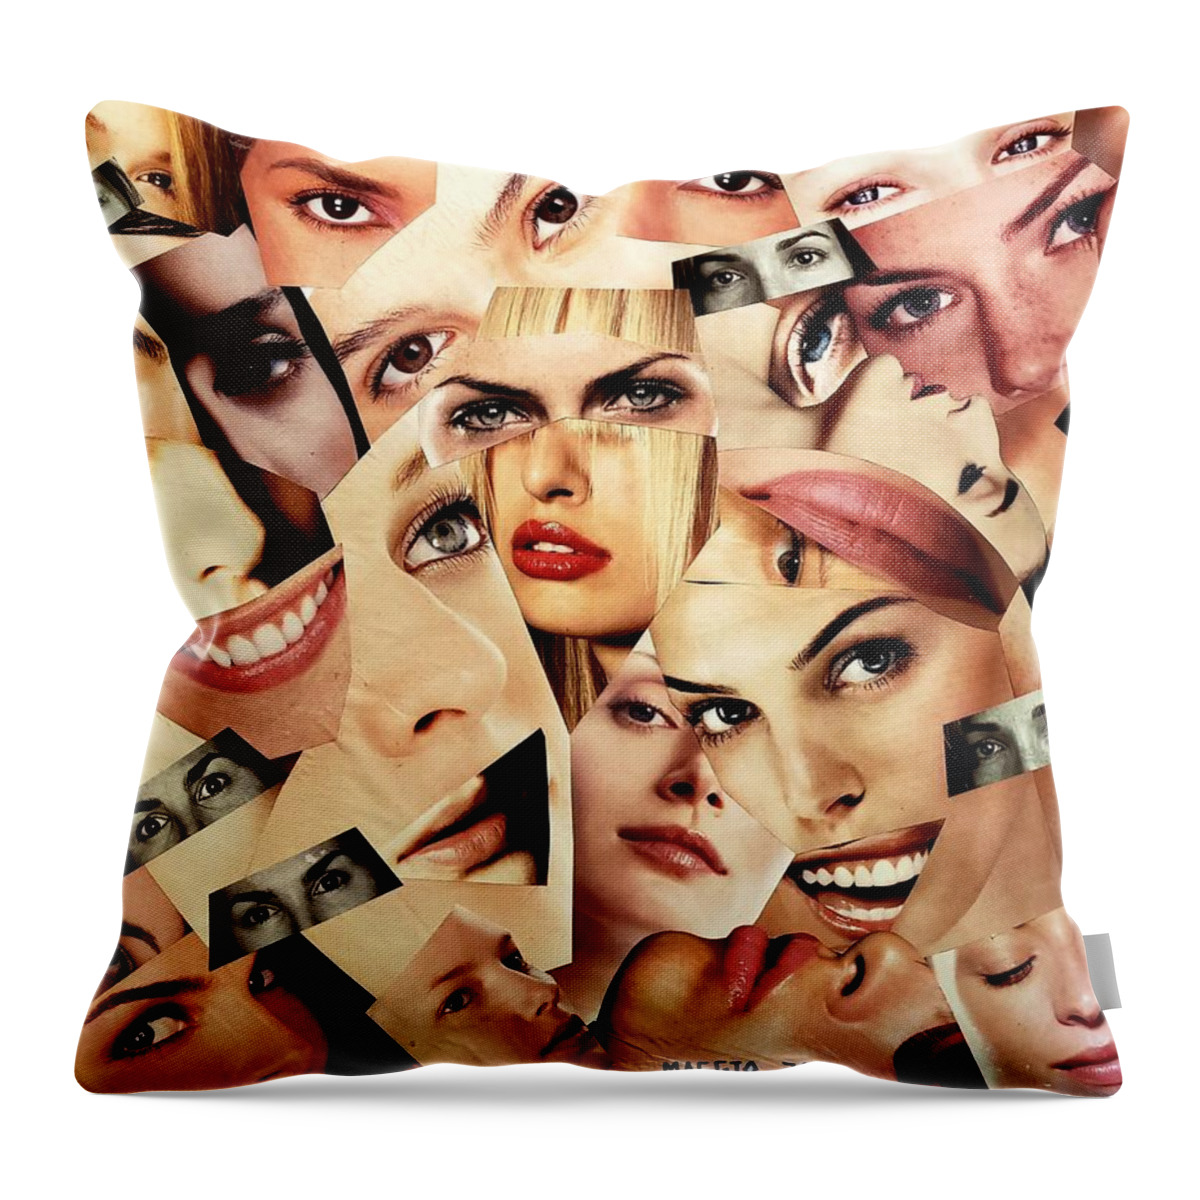  Throw Pillow featuring the mixed media 00001 by Adrian Maggio